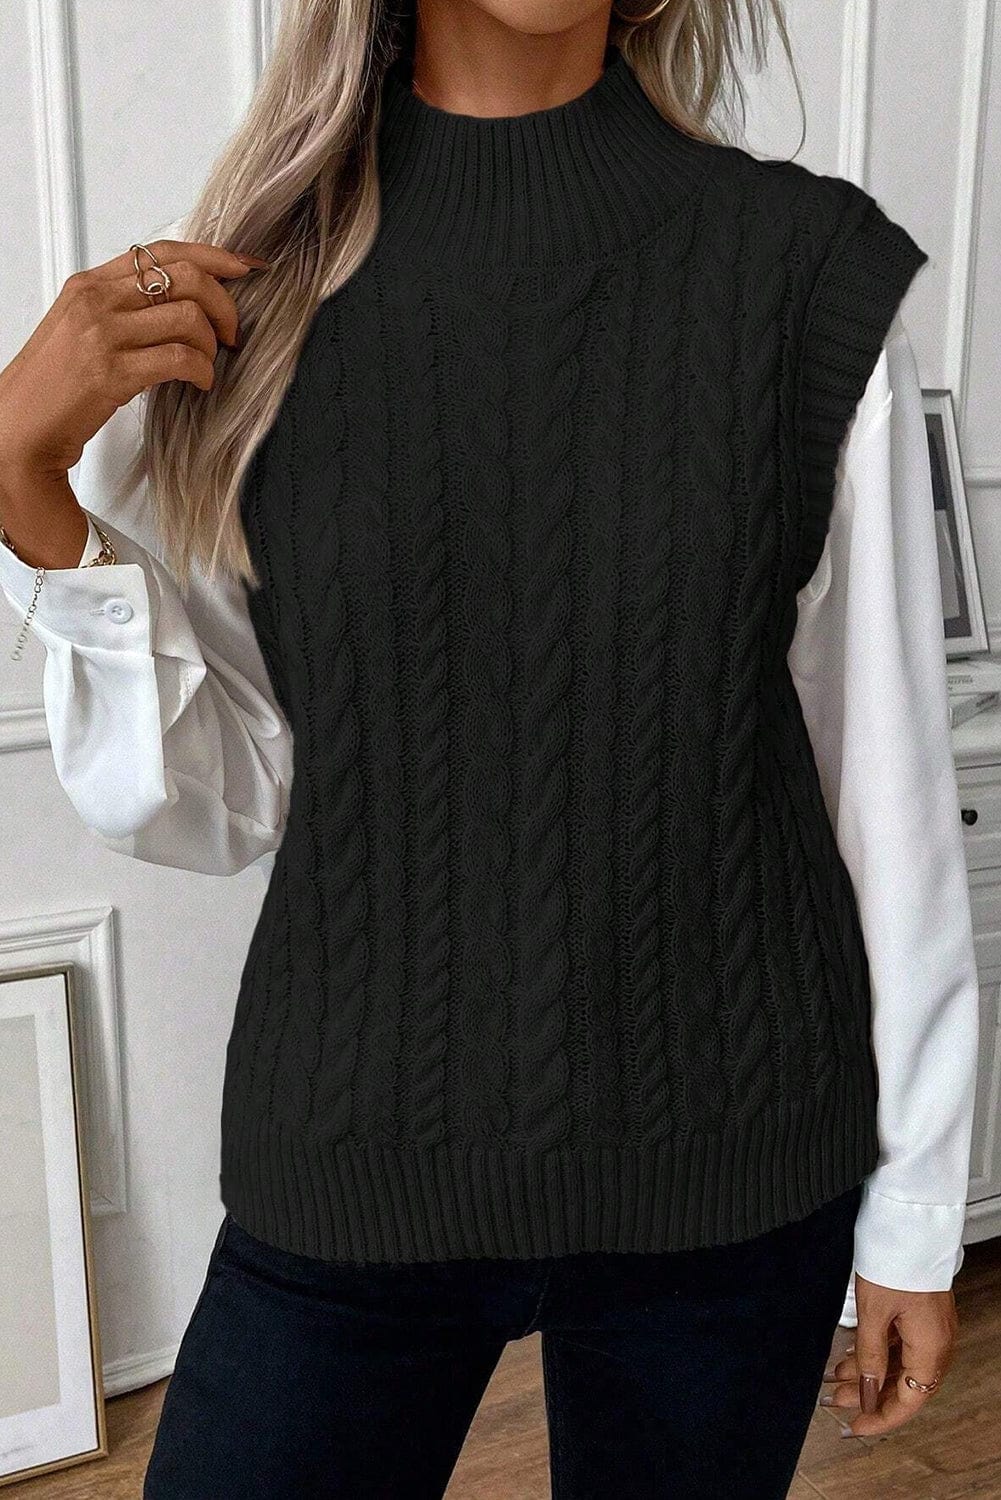 The802Gypsy  Sweaters & Cardigans/Sweater Vests Black / S / 100%Acrylic ❤️TRAVELING GYPSY-Cable Knit High Neck Sweater